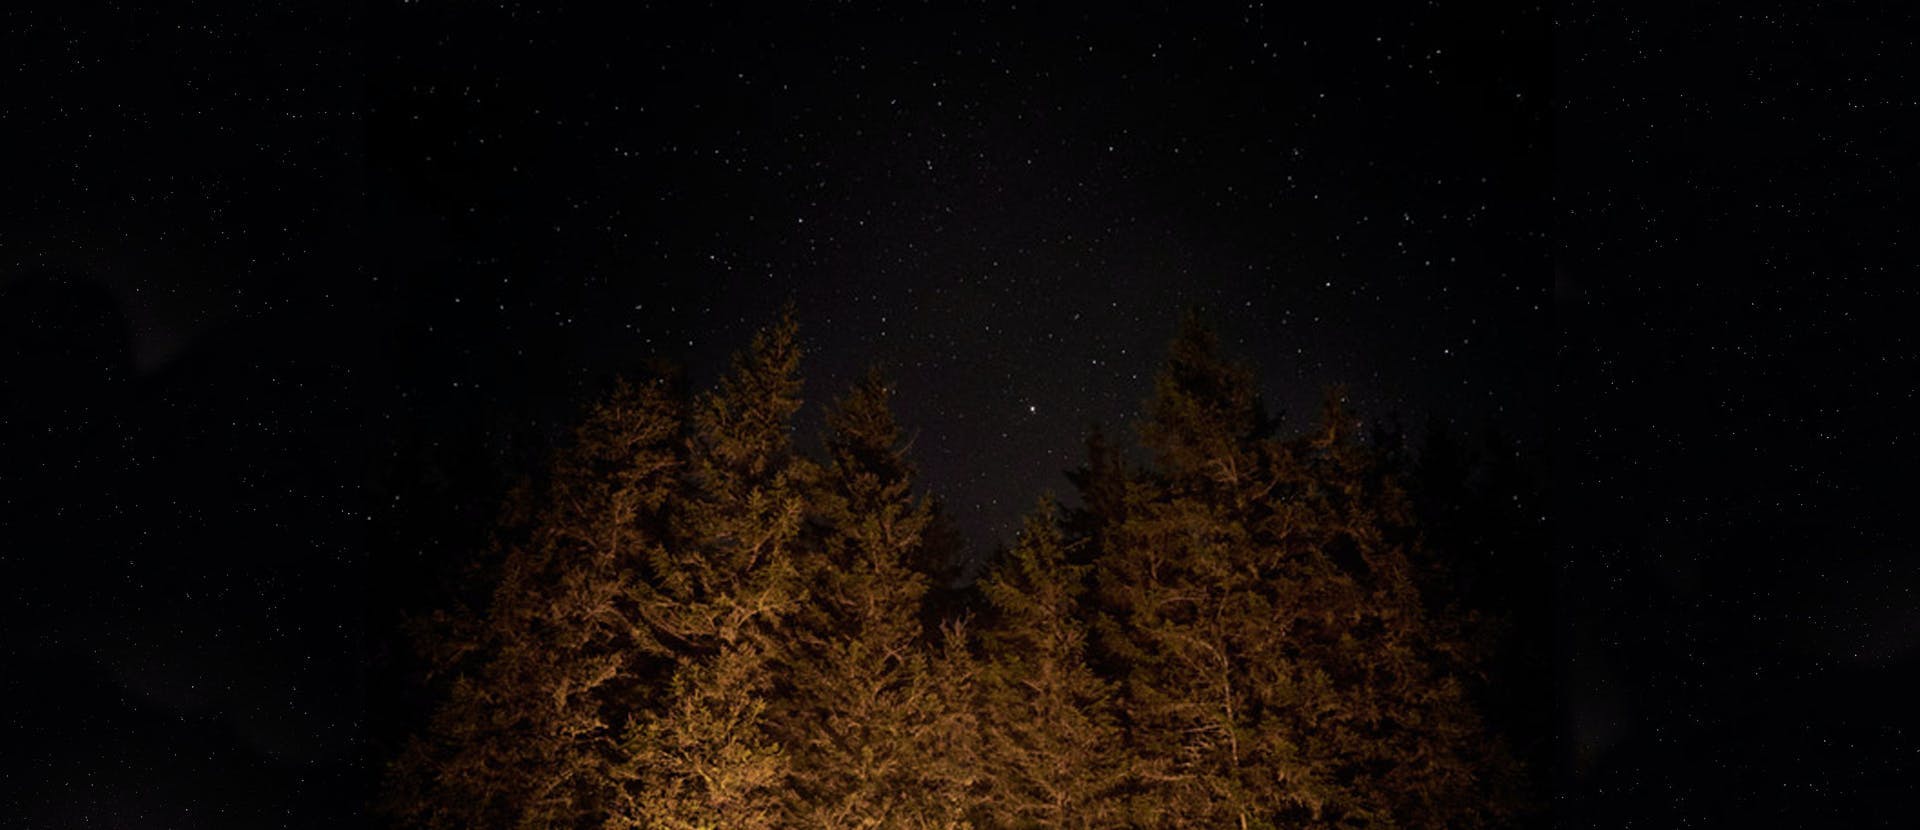 nature outdoors plant tree astronomy conifer outer space space universe night